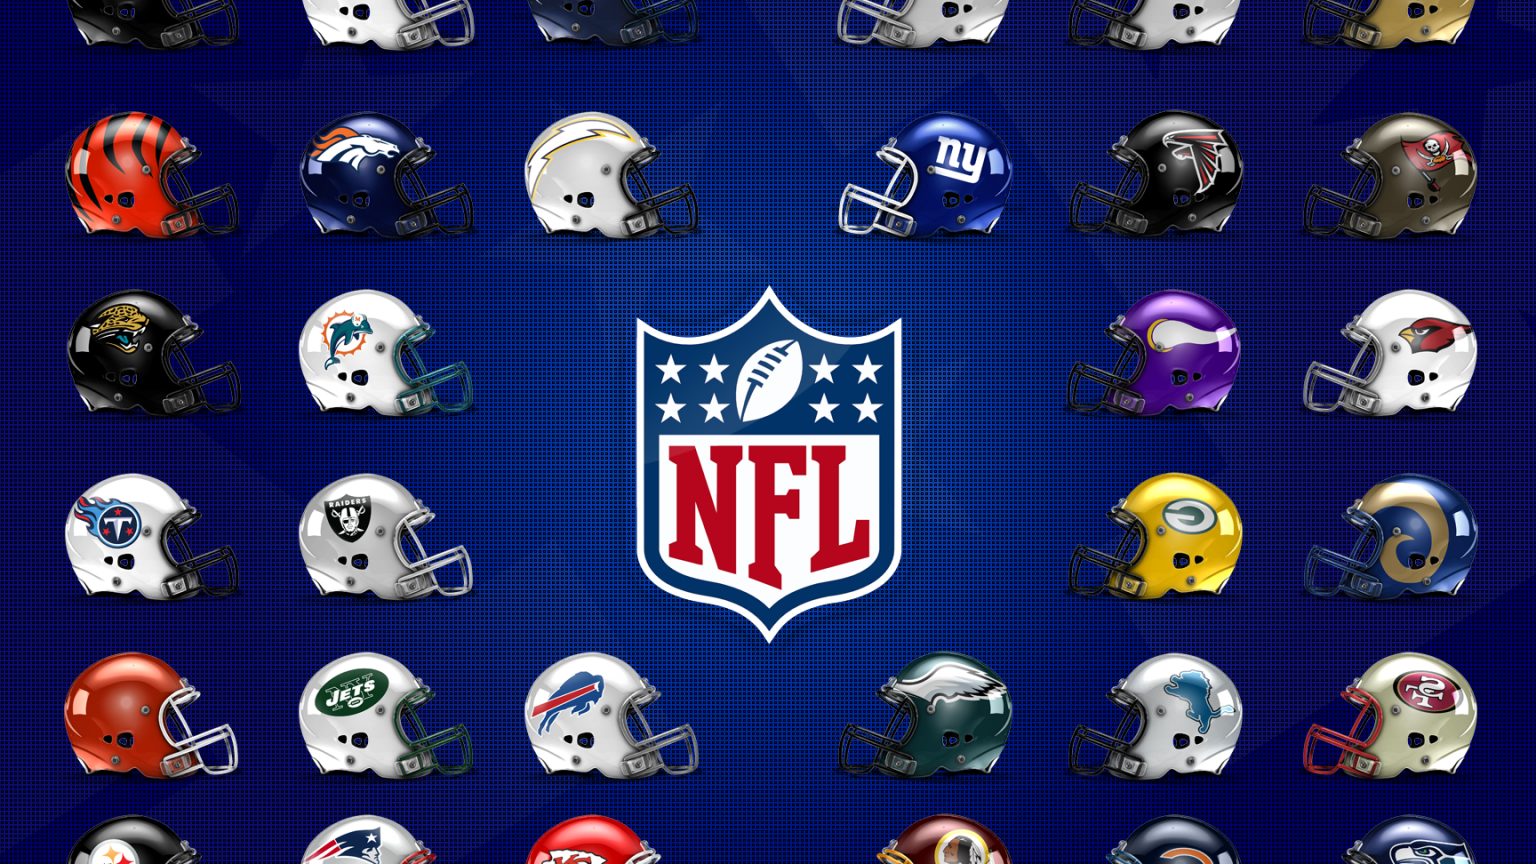 Free download Ranking All 32 NFL Helmets Great American Sports Network [1728x1296] for your Desktop, Mobile & Tablet. Explore NFL Sports Wallpaper. Free NFL Wallpaper, NFL Team